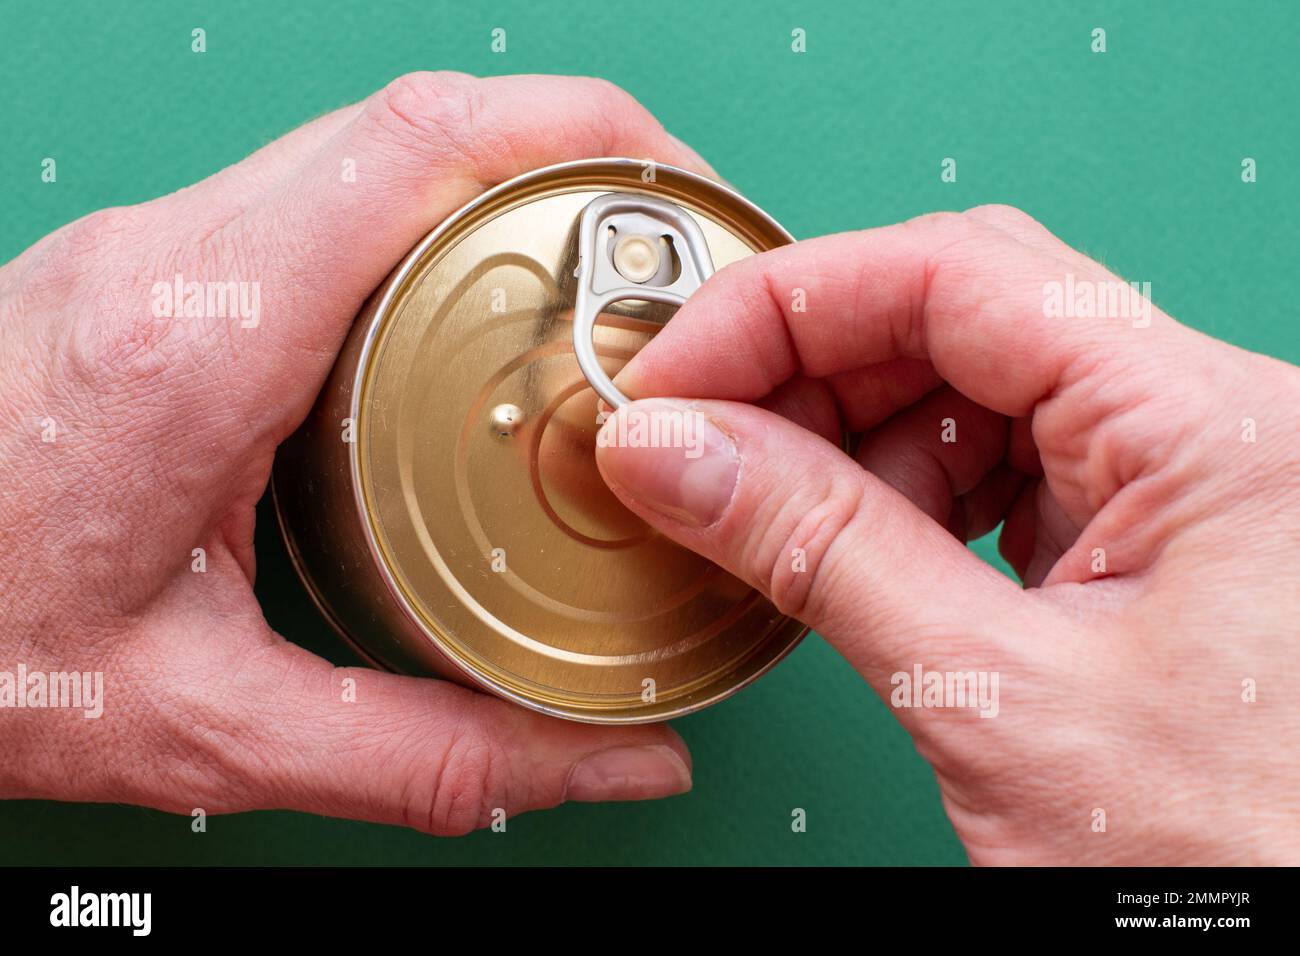 The hand of an adult holds a can of canned food, the second hand pulls the key, opens the can. Top view on green background with copy space. Close-up Stock Photo